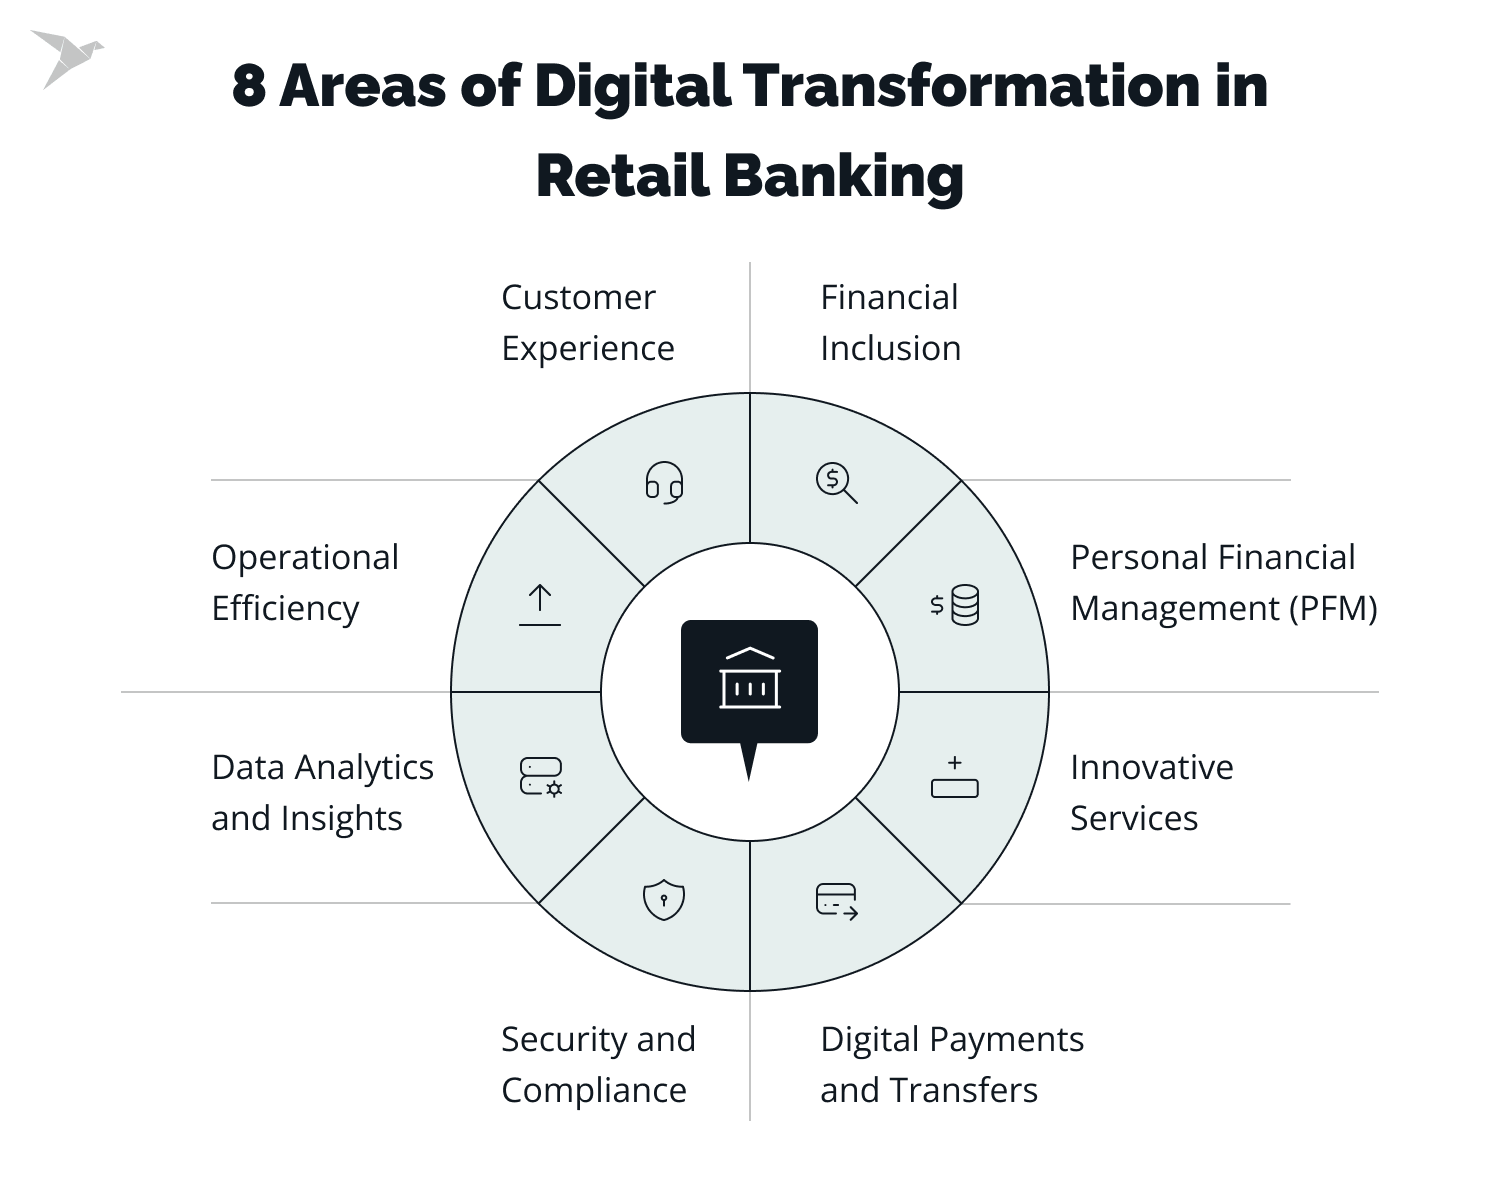 Retail Banking Digital Transformation: Shaping the Future of Financial Services